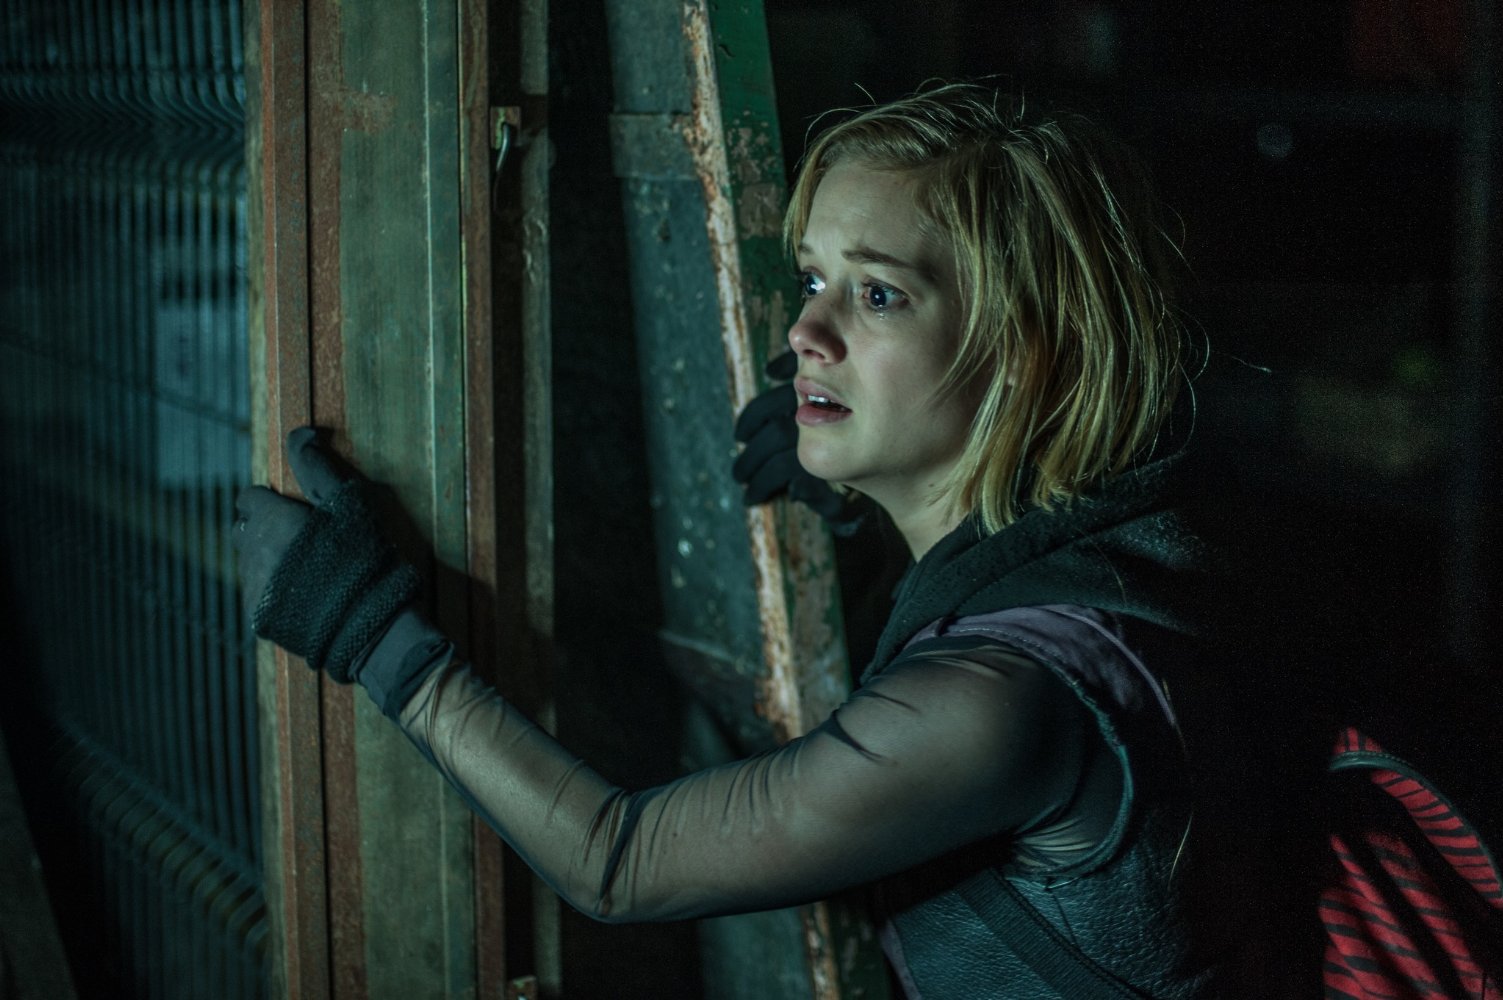 This is a still taken from the film Don't Breathe.